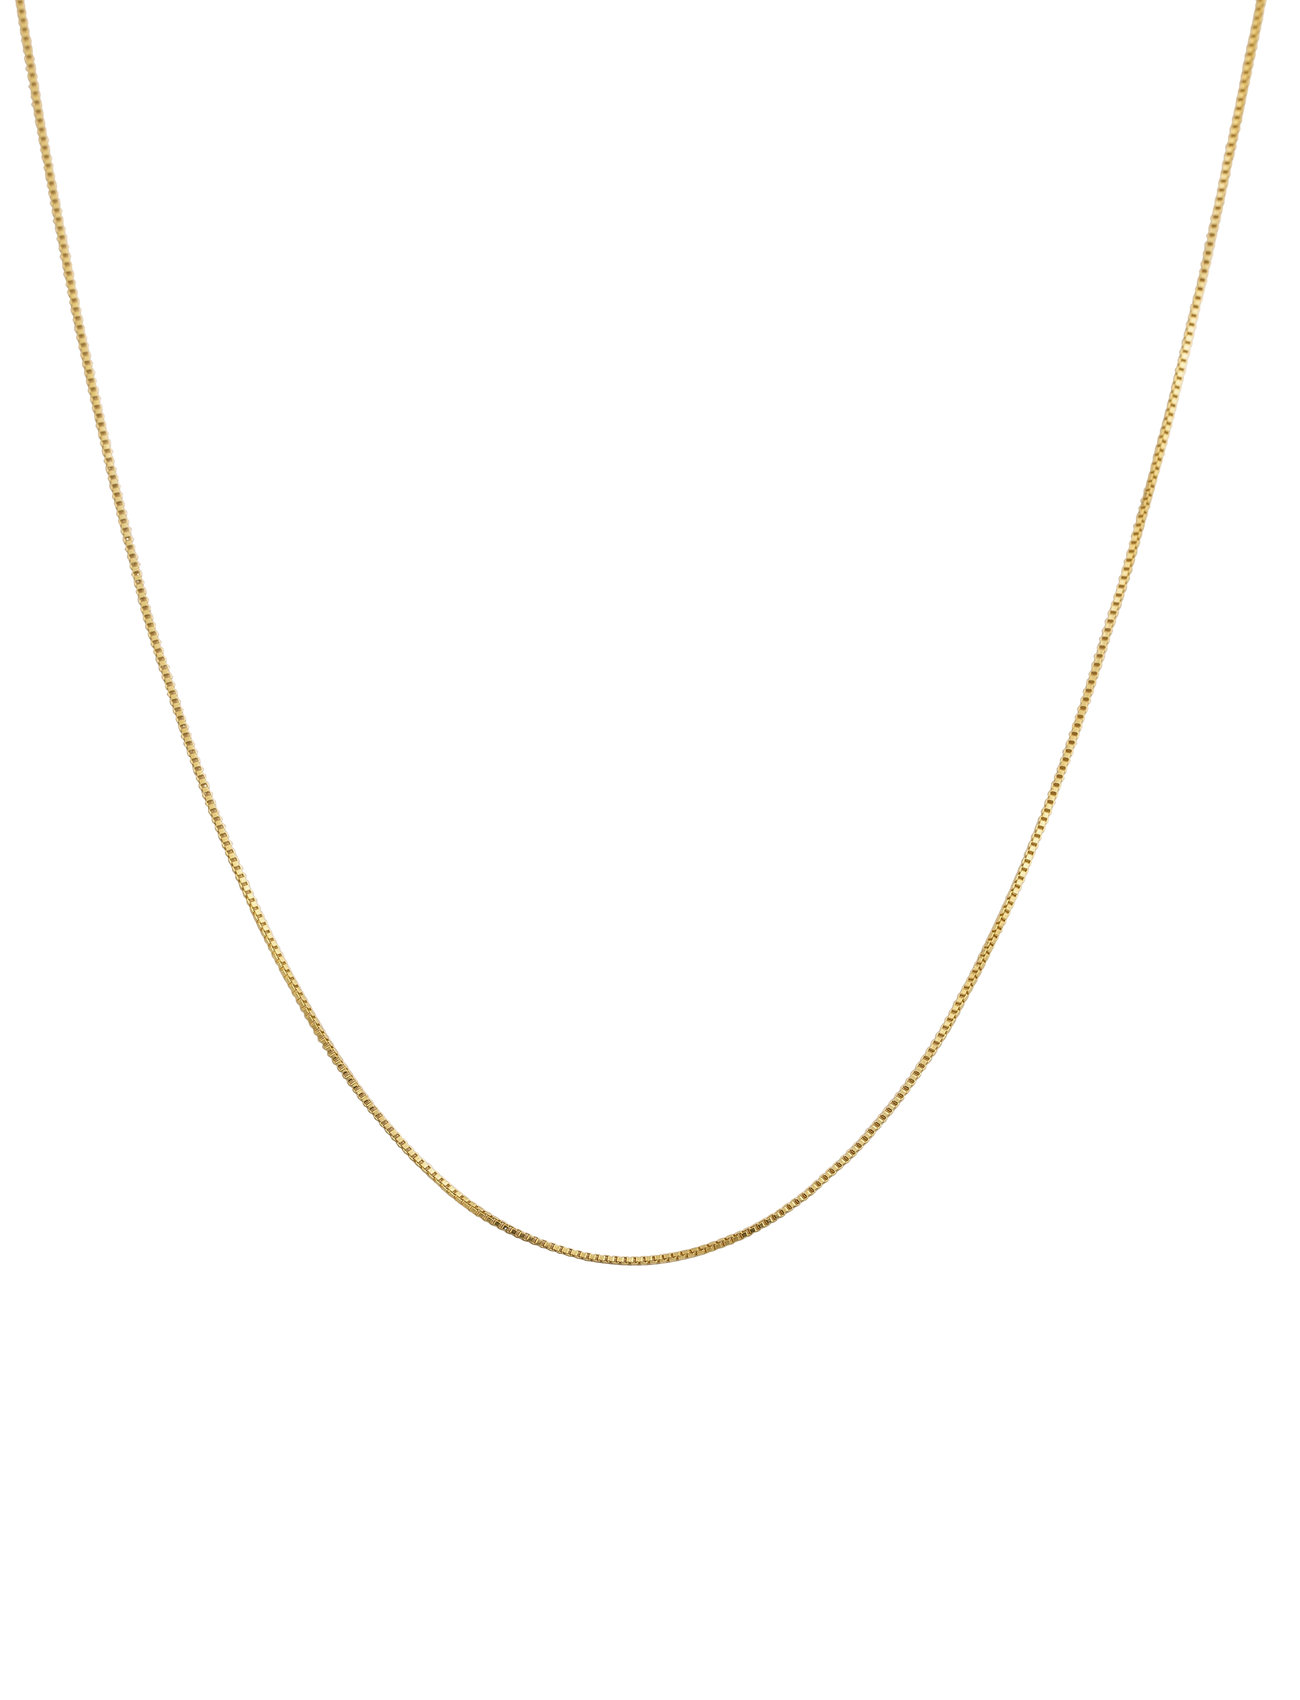 Beloved Medium Box Chain Gold Accessories Jewellery Necklaces Chain Necklaces Gold Syster P